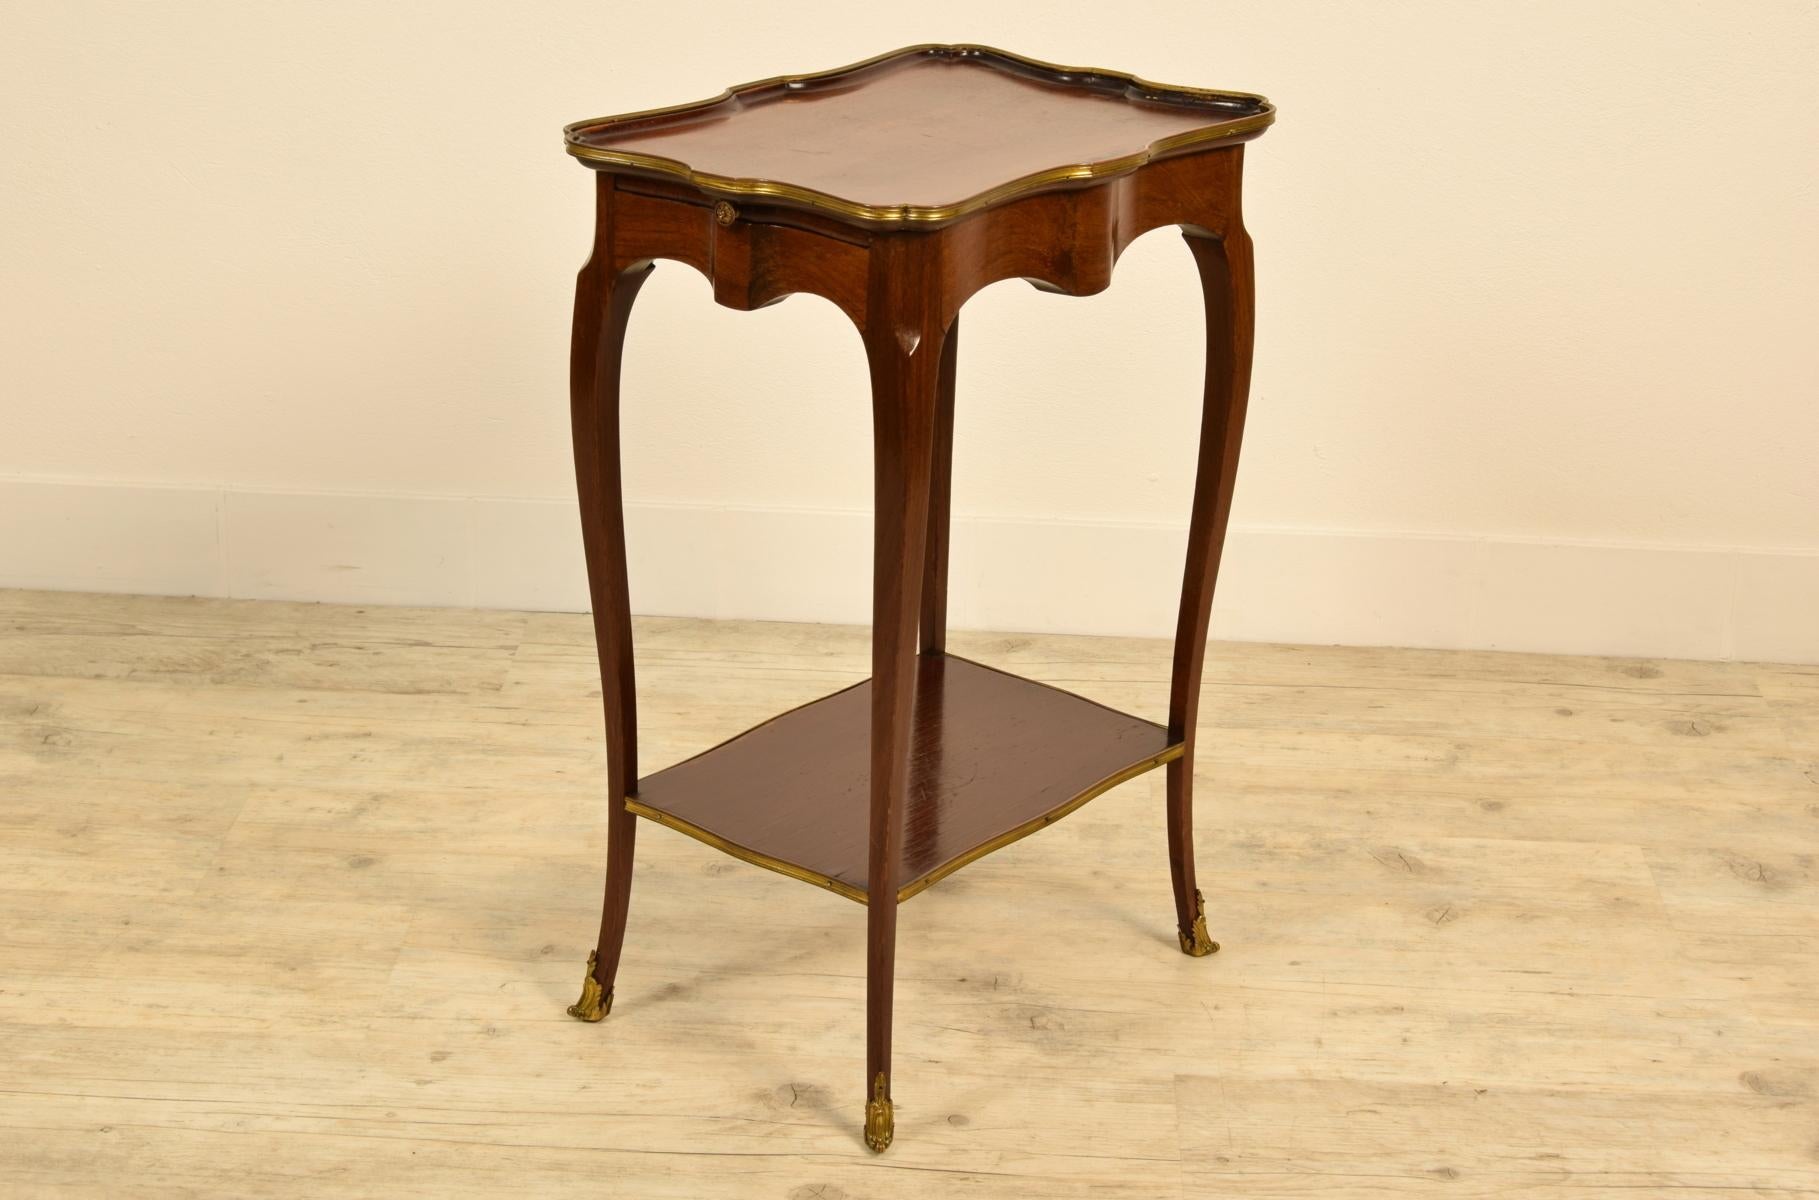 Hand-Carved 19th Century, French Mahogany Coffee Table by Escalier de Cristal For Sale